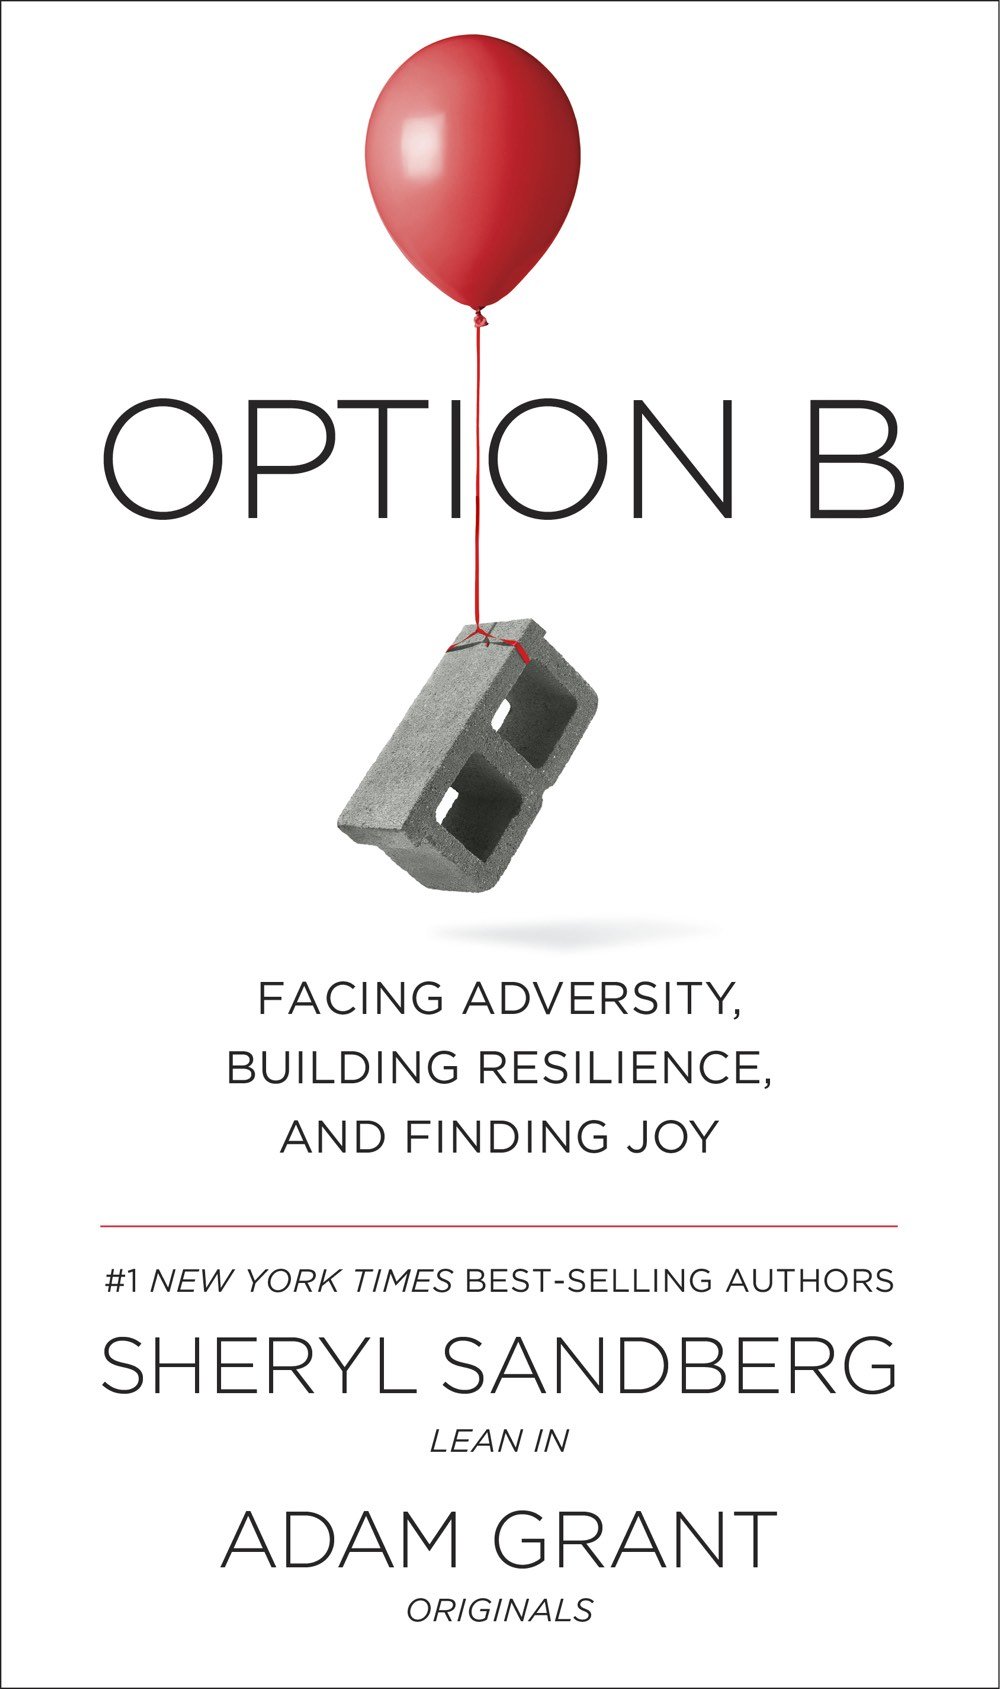 Option B: building resilience and finding meaning in the face of adversity